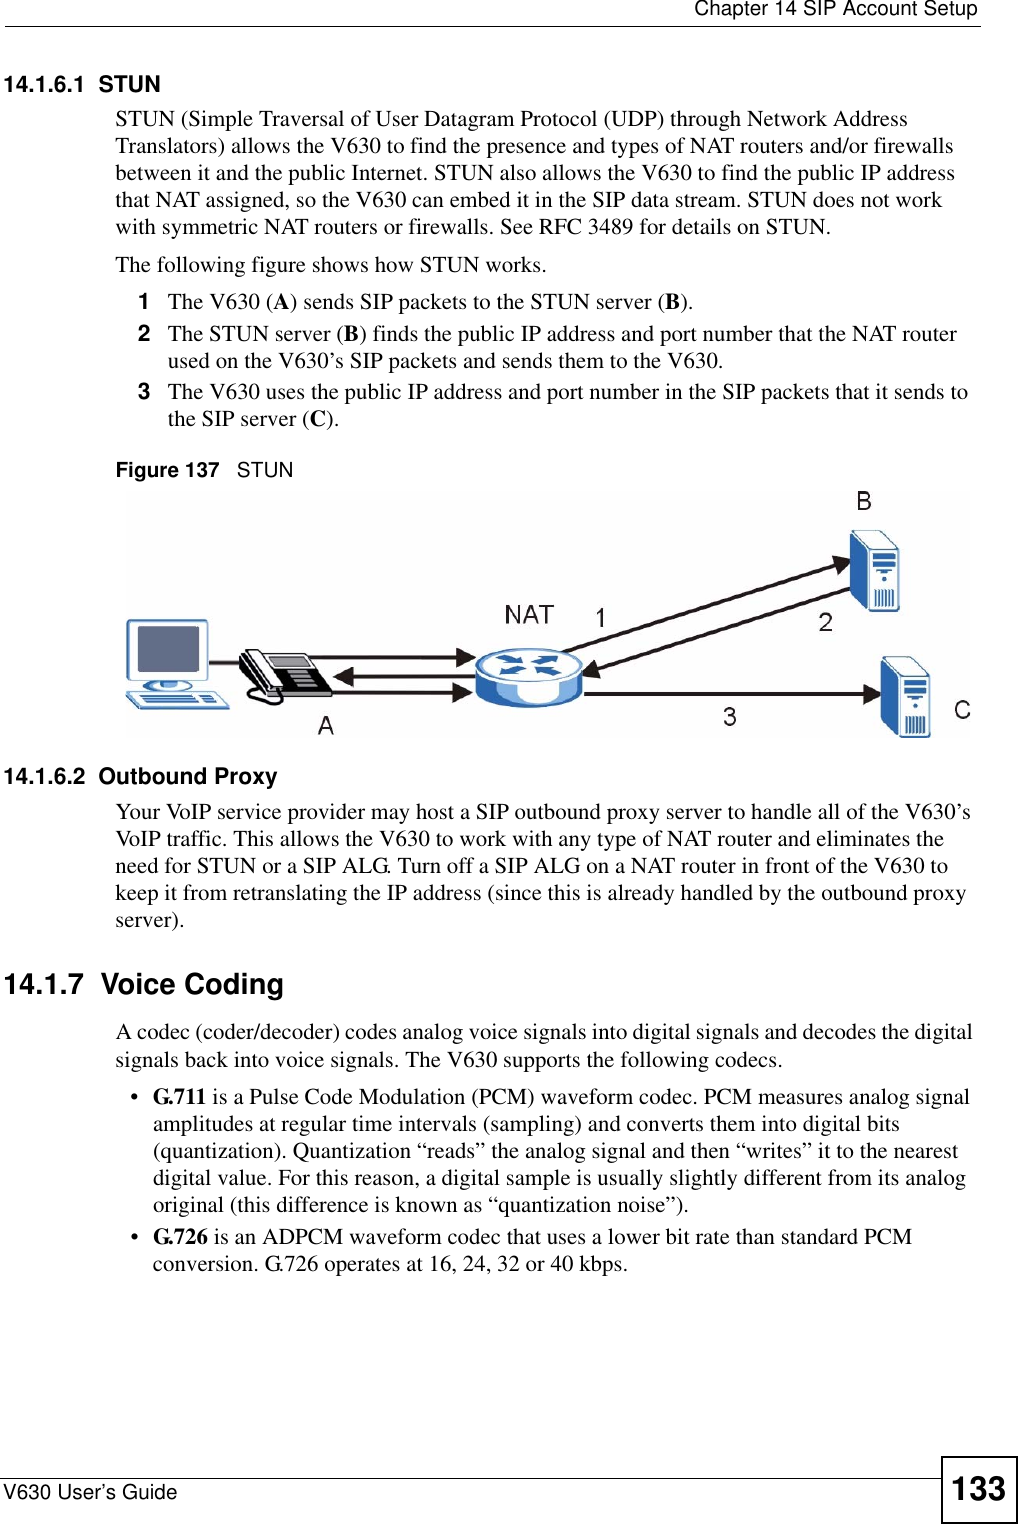  Chapter 14 SIP Account SetupV630 User’s Guide 13314.1.6.1  STUNSTUN (Simple Traversal of User Datagram Protocol (UDP) through Network Address Translators) allows the V630 to find the presence and types of NAT routers and/or firewalls between it and the public Internet. STUN also allows the V630 to find the public IP address that NAT assigned, so the V630 can embed it in the SIP data stream. STUN does not work with symmetric NAT routers or firewalls. See RFC 3489 for details on STUN.The following figure shows how STUN works. 1The V630 (A) sends SIP packets to the STUN server (B).2The STUN server (B) finds the public IP address and port number that the NAT router used on the V630’s SIP packets and sends them to the V630.3The V630 uses the public IP address and port number in the SIP packets that it sends to the SIP server (C).Figure 137   STUN14.1.6.2  Outbound ProxyYour VoIP service provider may host a SIP outbound proxy server to handle all of the V630’s VoIP traffic. This allows the V630 to work with any type of NAT router and eliminates the need for STUN or a SIP ALG. Turn off a SIP ALG on a NAT router in front of the V630 to keep it from retranslating the IP address (since this is already handled by the outbound proxy server).14.1.7  Voice CodingA codec (coder/decoder) codes analog voice signals into digital signals and decodes the digital signals back into voice signals. The V630 supports the following codecs.•G.711 is a Pulse Code Modulation (PCM) waveform codec. PCM measures analog signal amplitudes at regular time intervals (sampling) and converts them into digital bits (quantization). Quantization “reads” the analog signal and then “writes” it to the nearest digital value. For this reason, a digital sample is usually slightly different from its analog original (this difference is known as “quantization noise”). •G.726 is an ADPCM waveform codec that uses a lower bit rate than standard PCM conversion. G.726 operates at 16, 24, 32 or 40 kbps. 